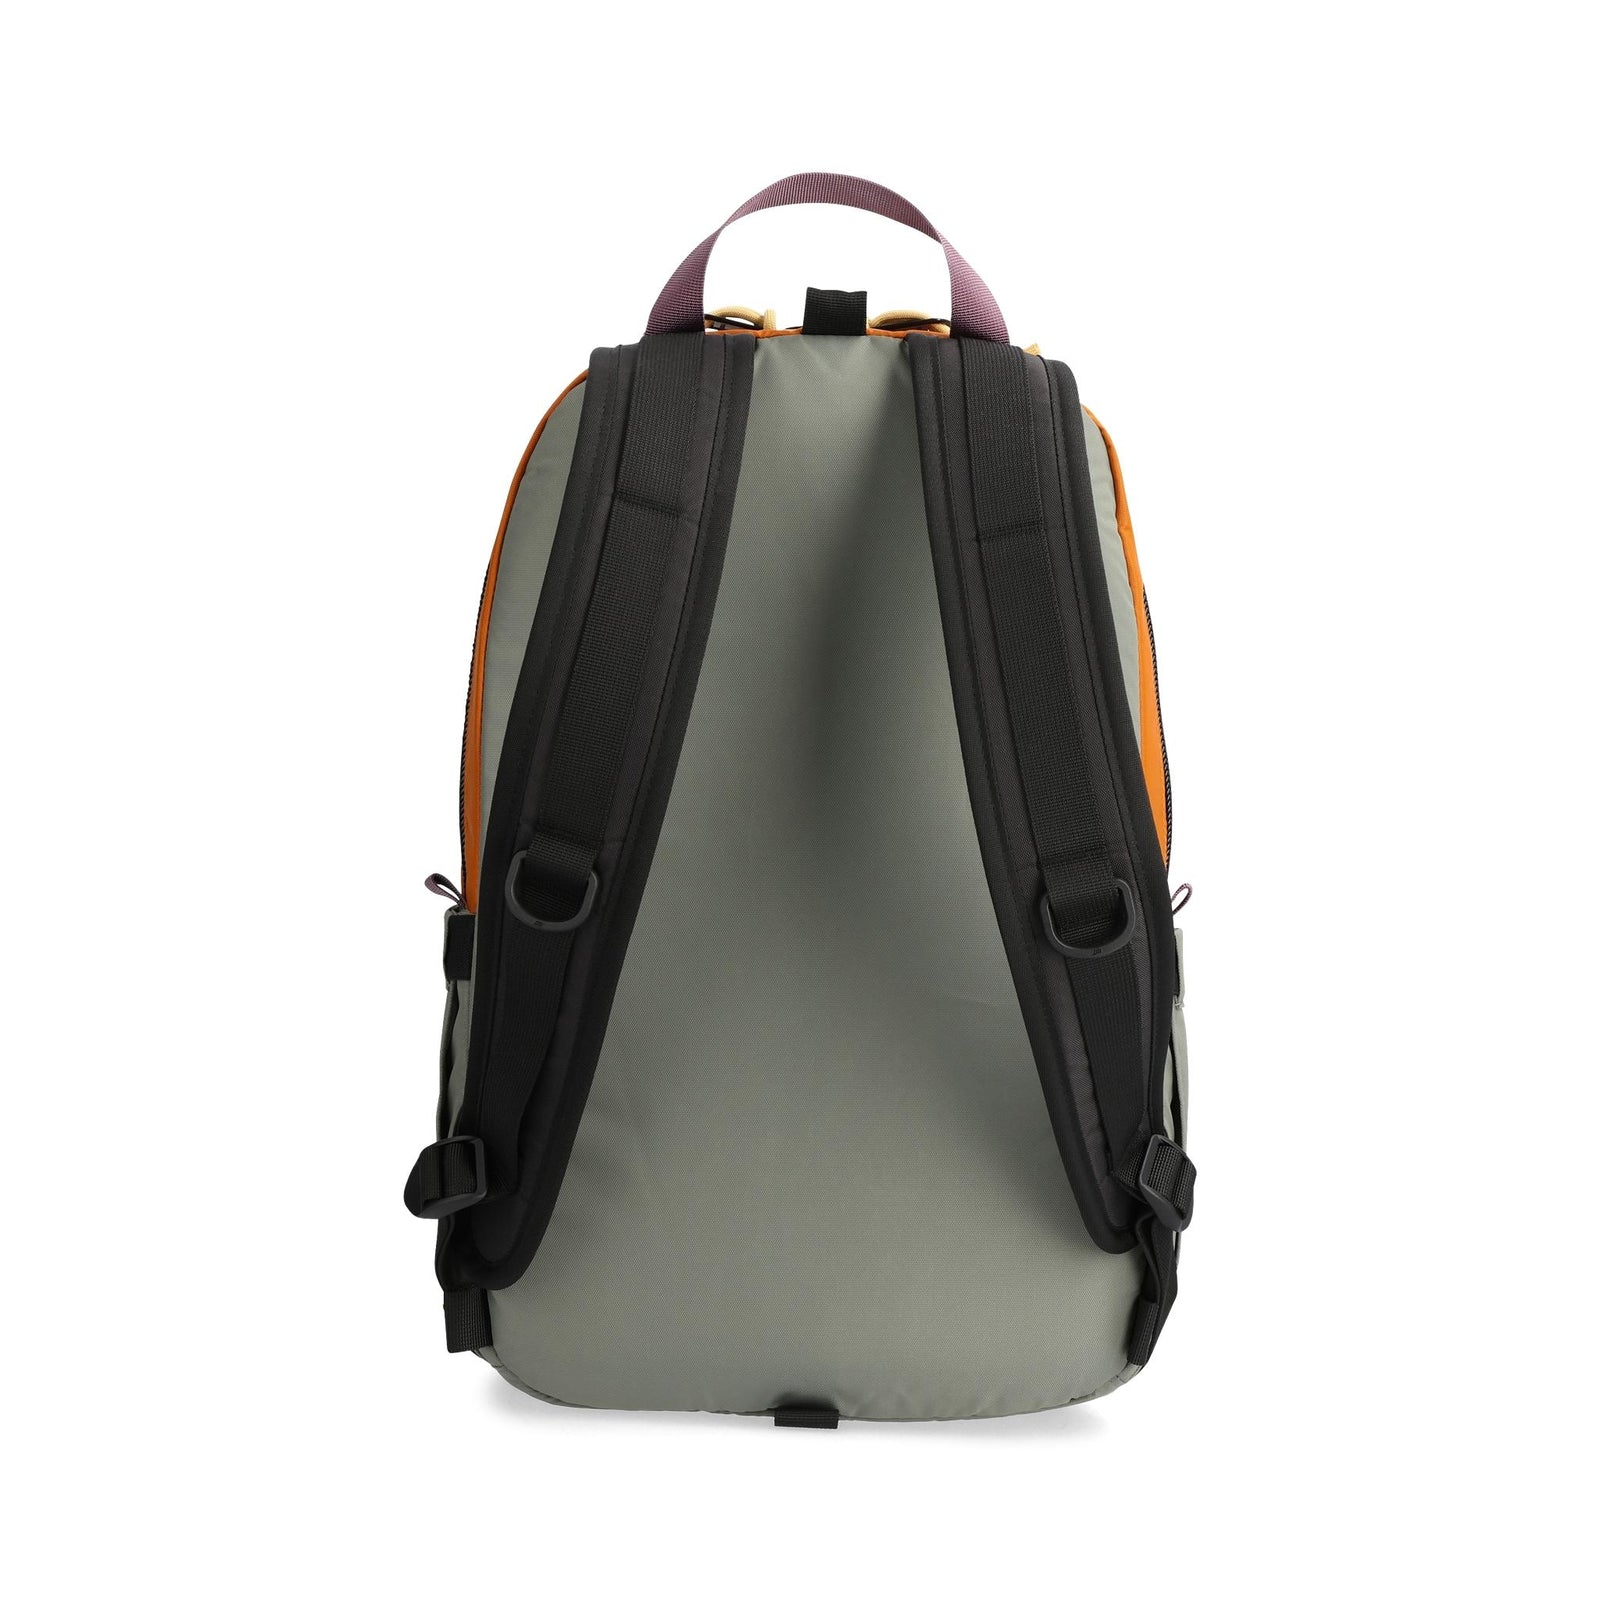 Back View of Topo Designs Light Pack in "Beetle / Spice"